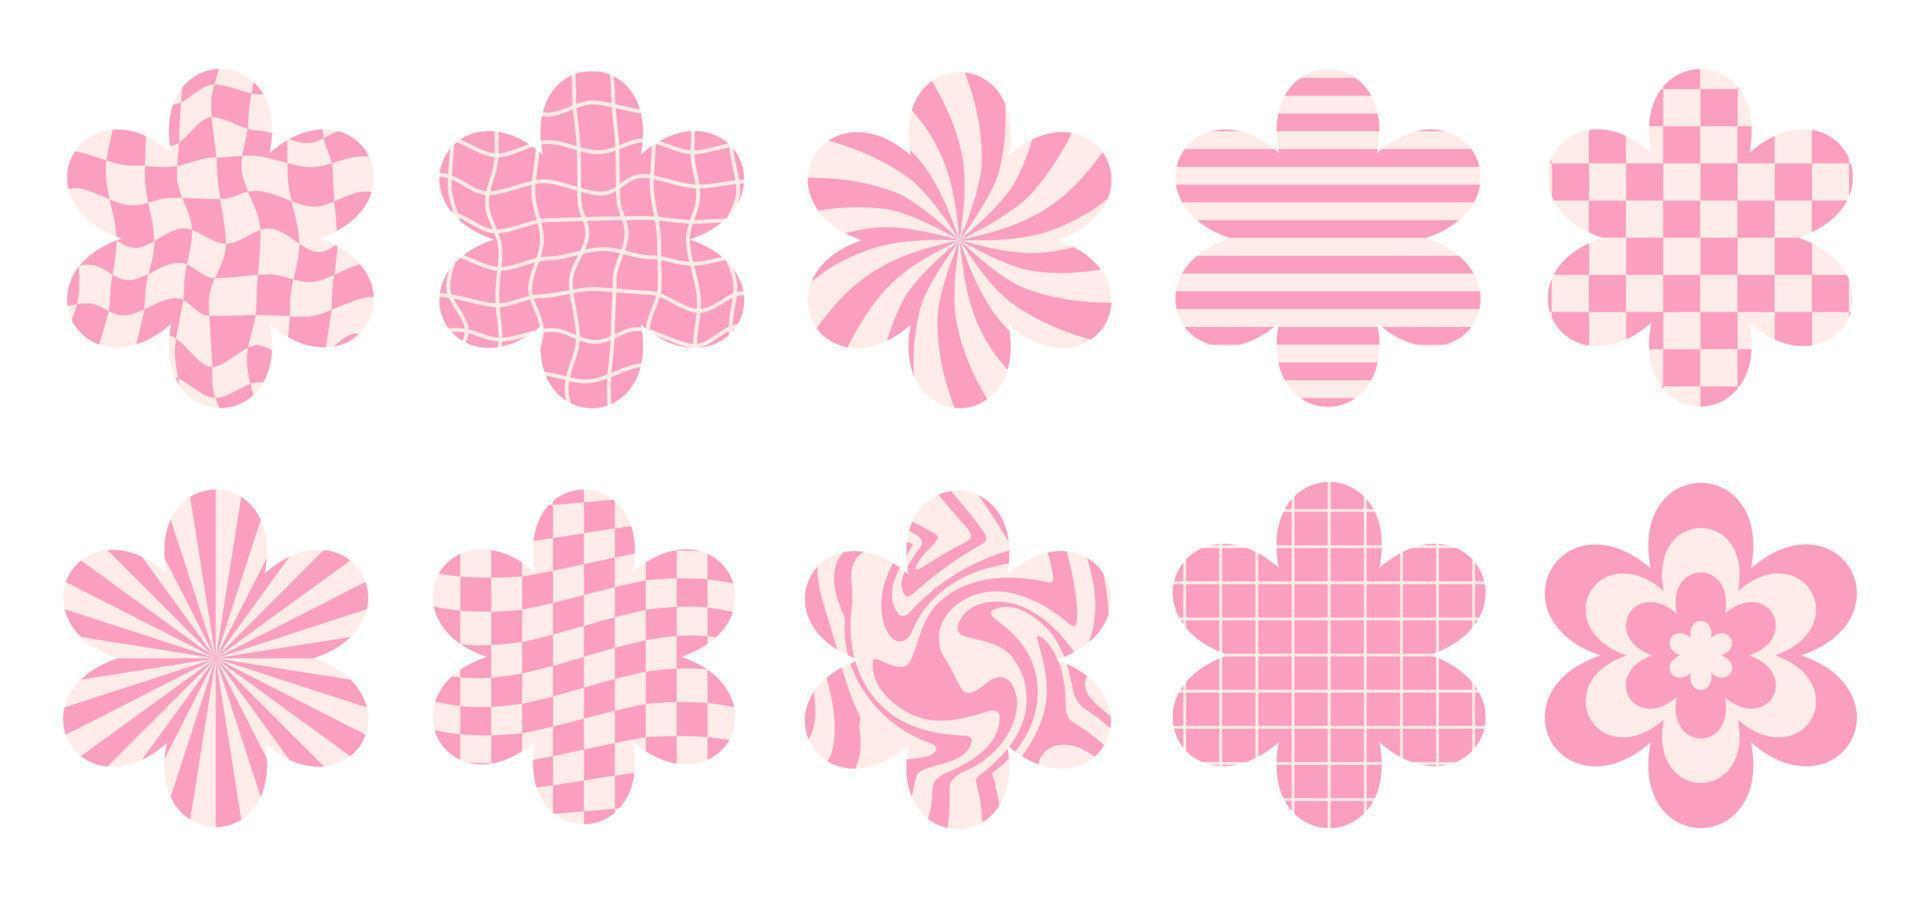 Vector set flowers icons with different backgrounds isolated on a white background. Retro illustration in groovy style 60s, 70s.